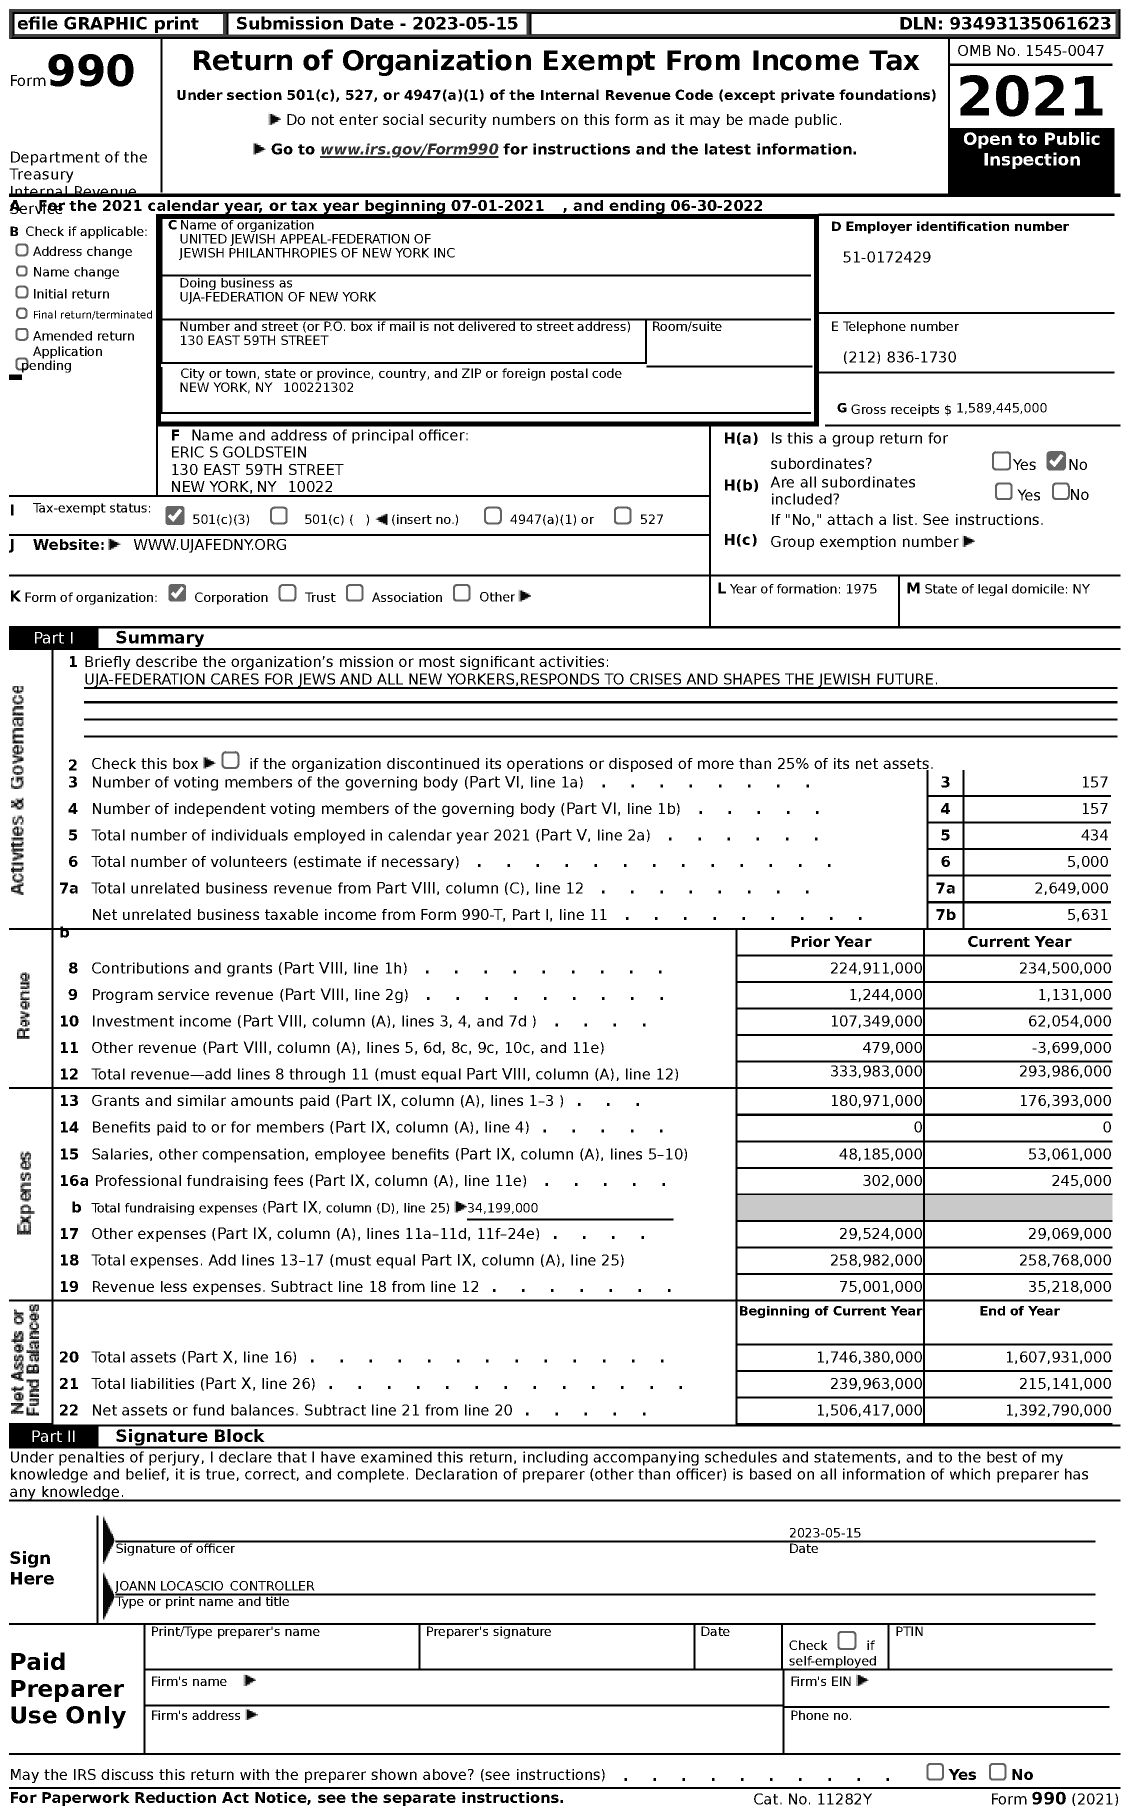 Image of first page of 2021 Form 990 for Uja-Federation of New York